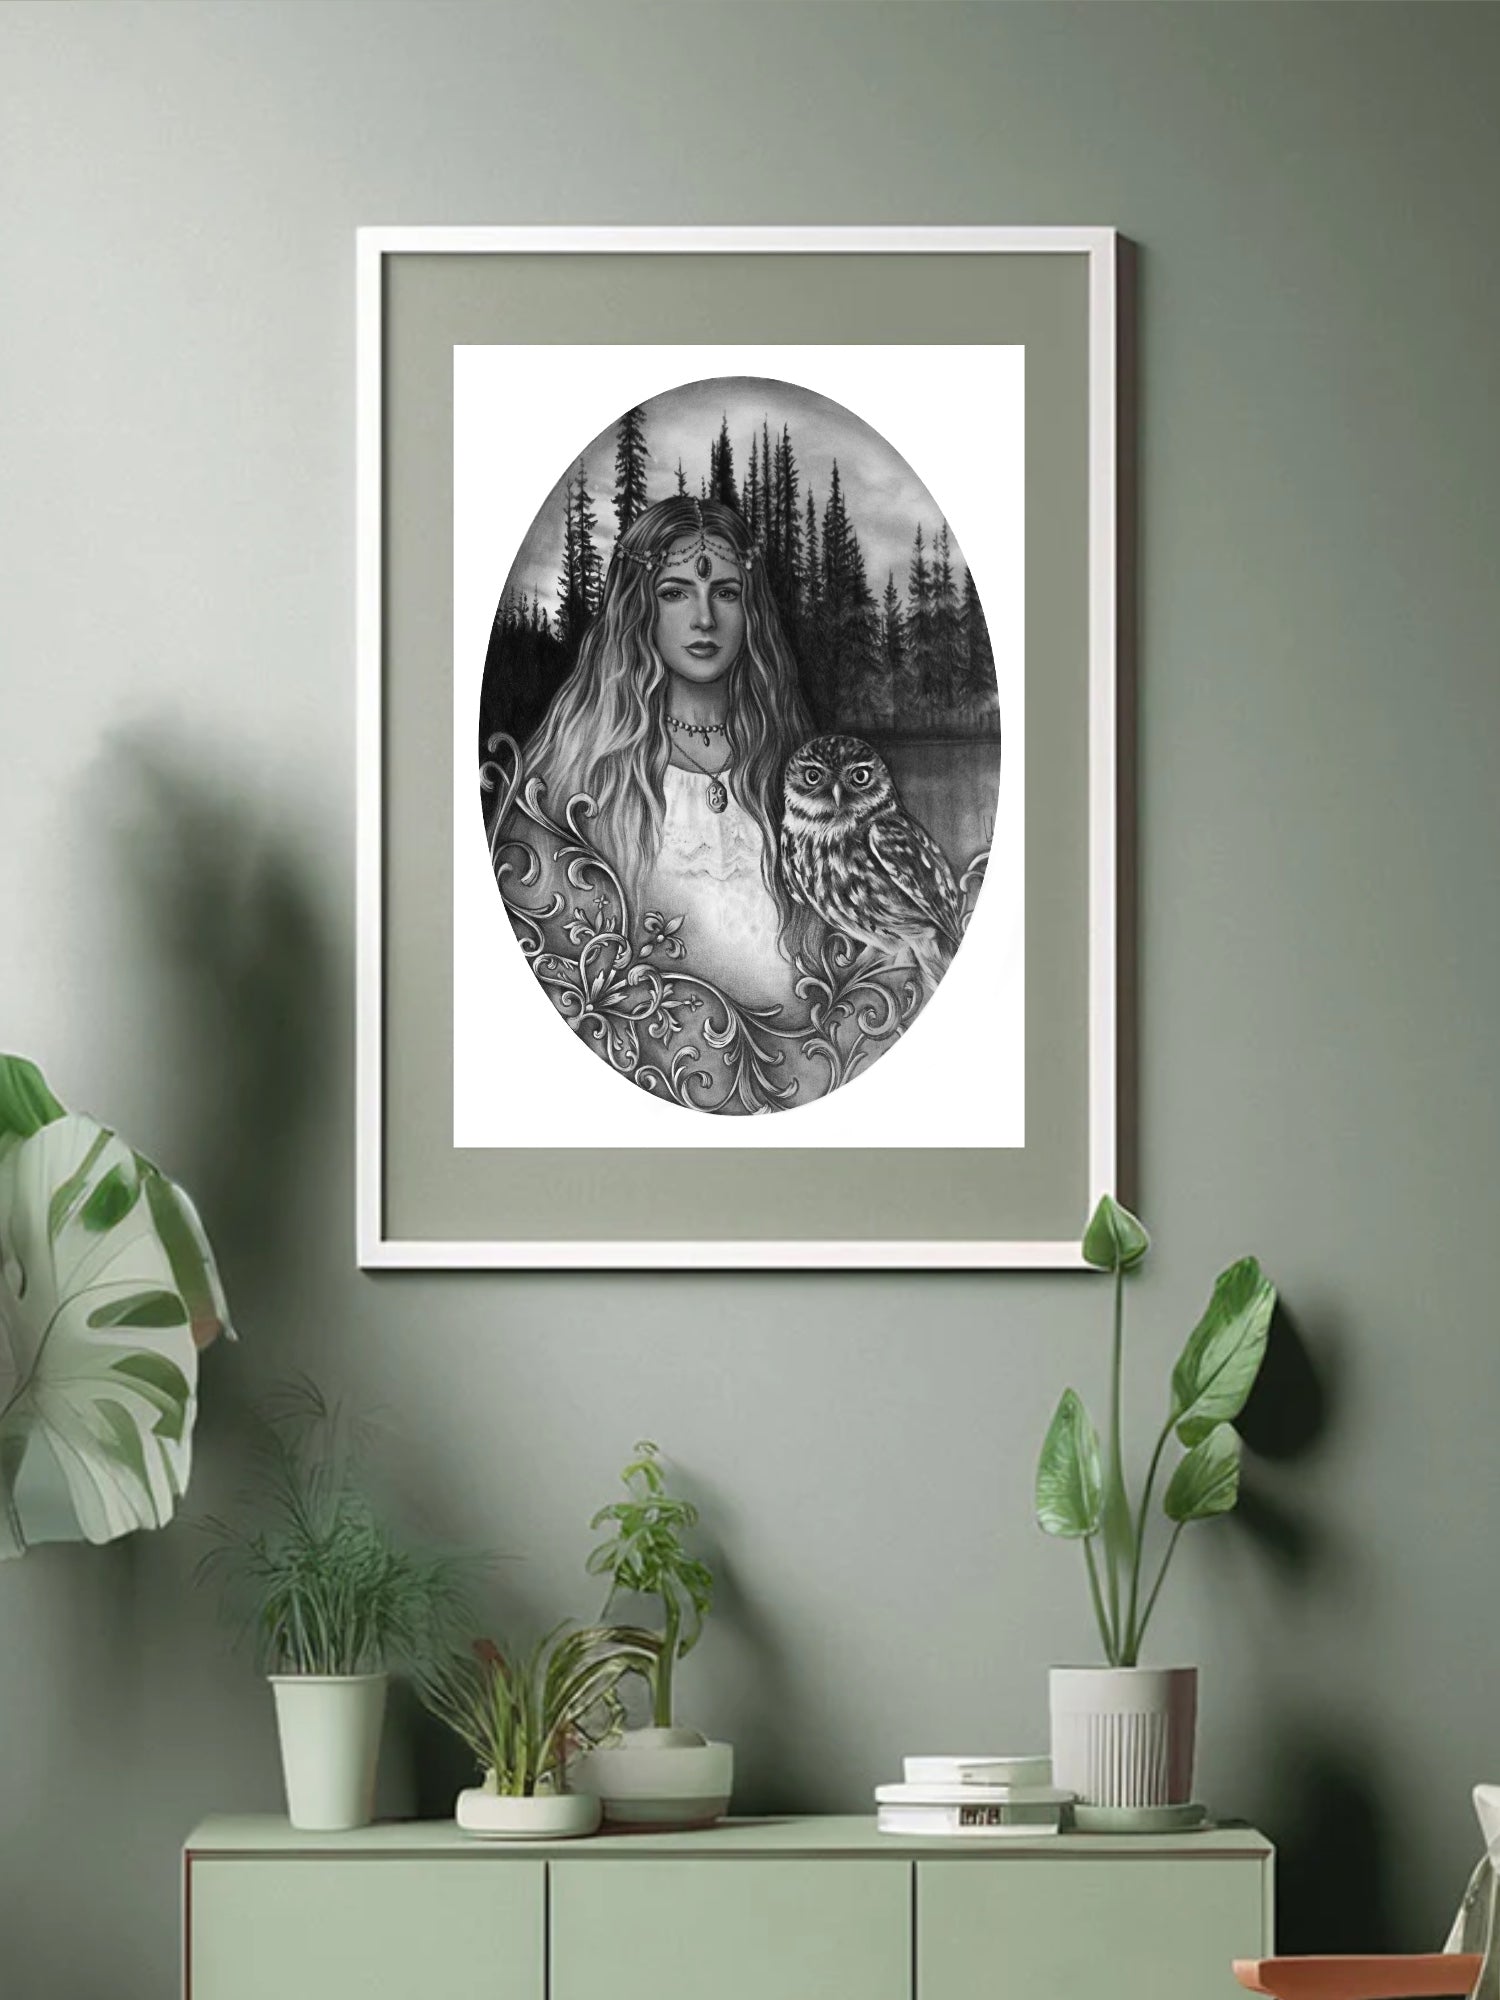 A graphite art depiction of A princess clad in diamond jewelry set Infront of a forested lake with her trusted guide, an owl.